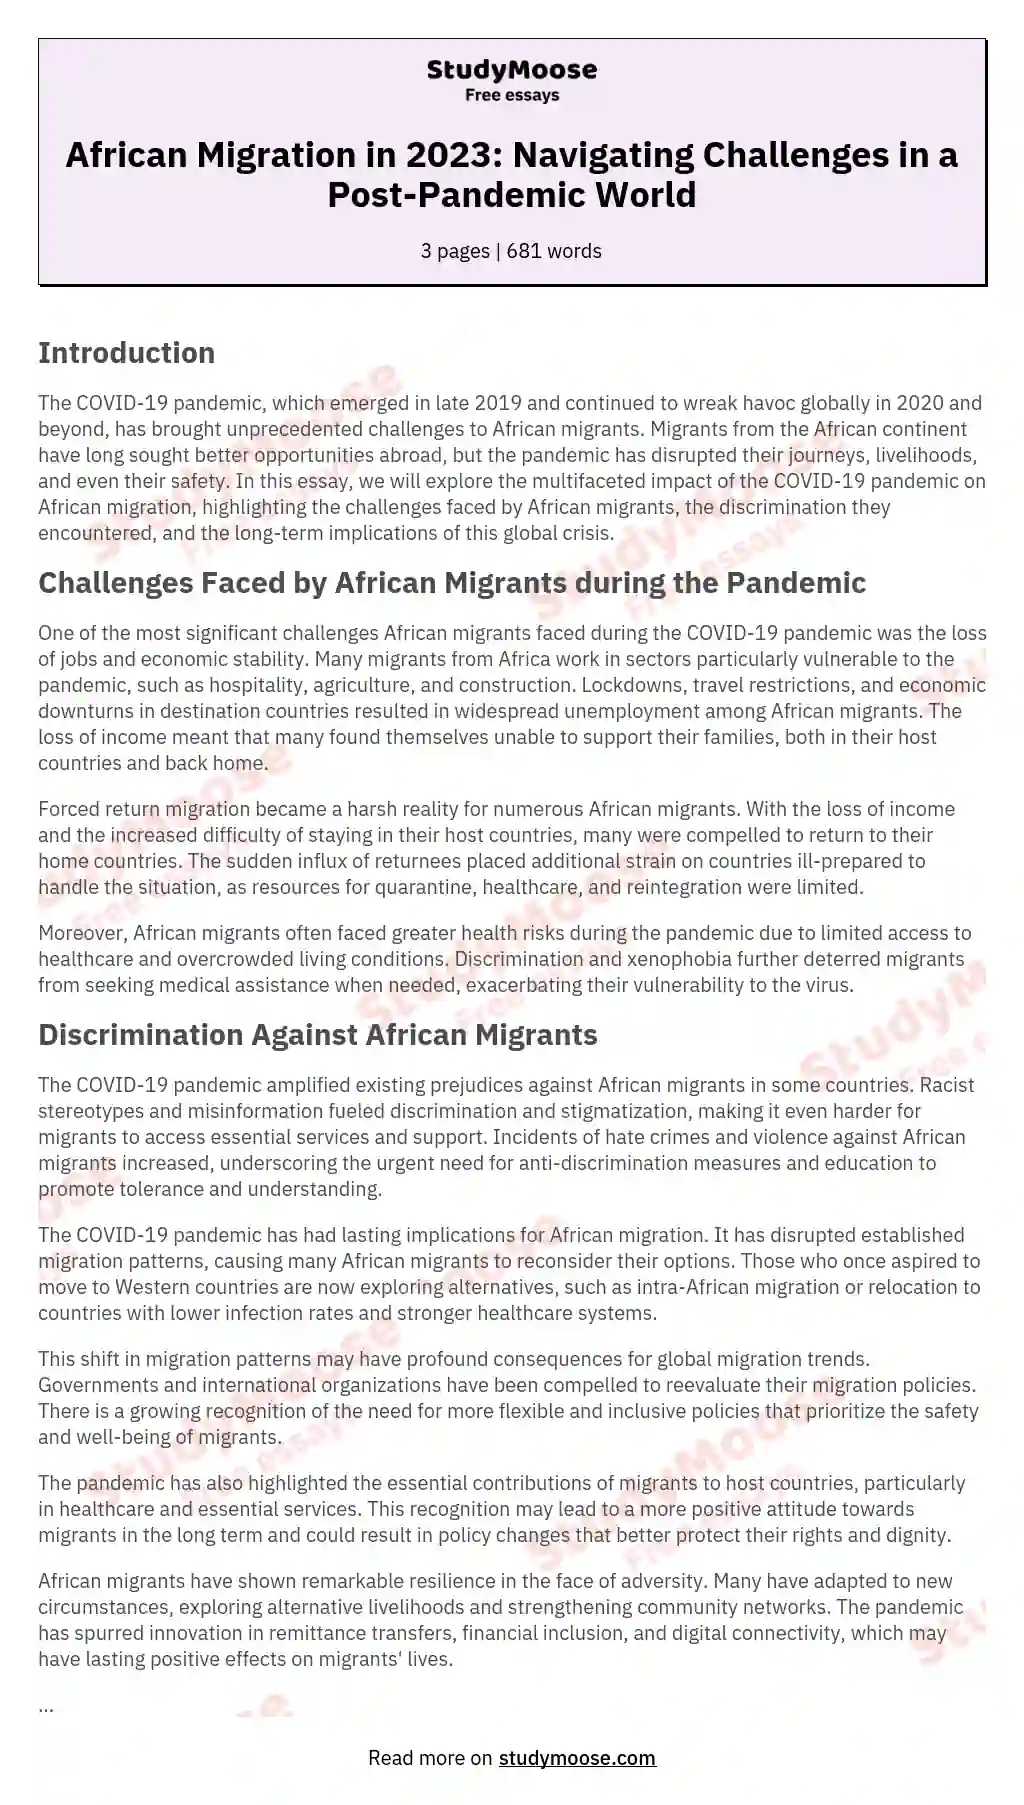 African Migration in 2023: Navigating Challenges in a Post-Pandemic World essay